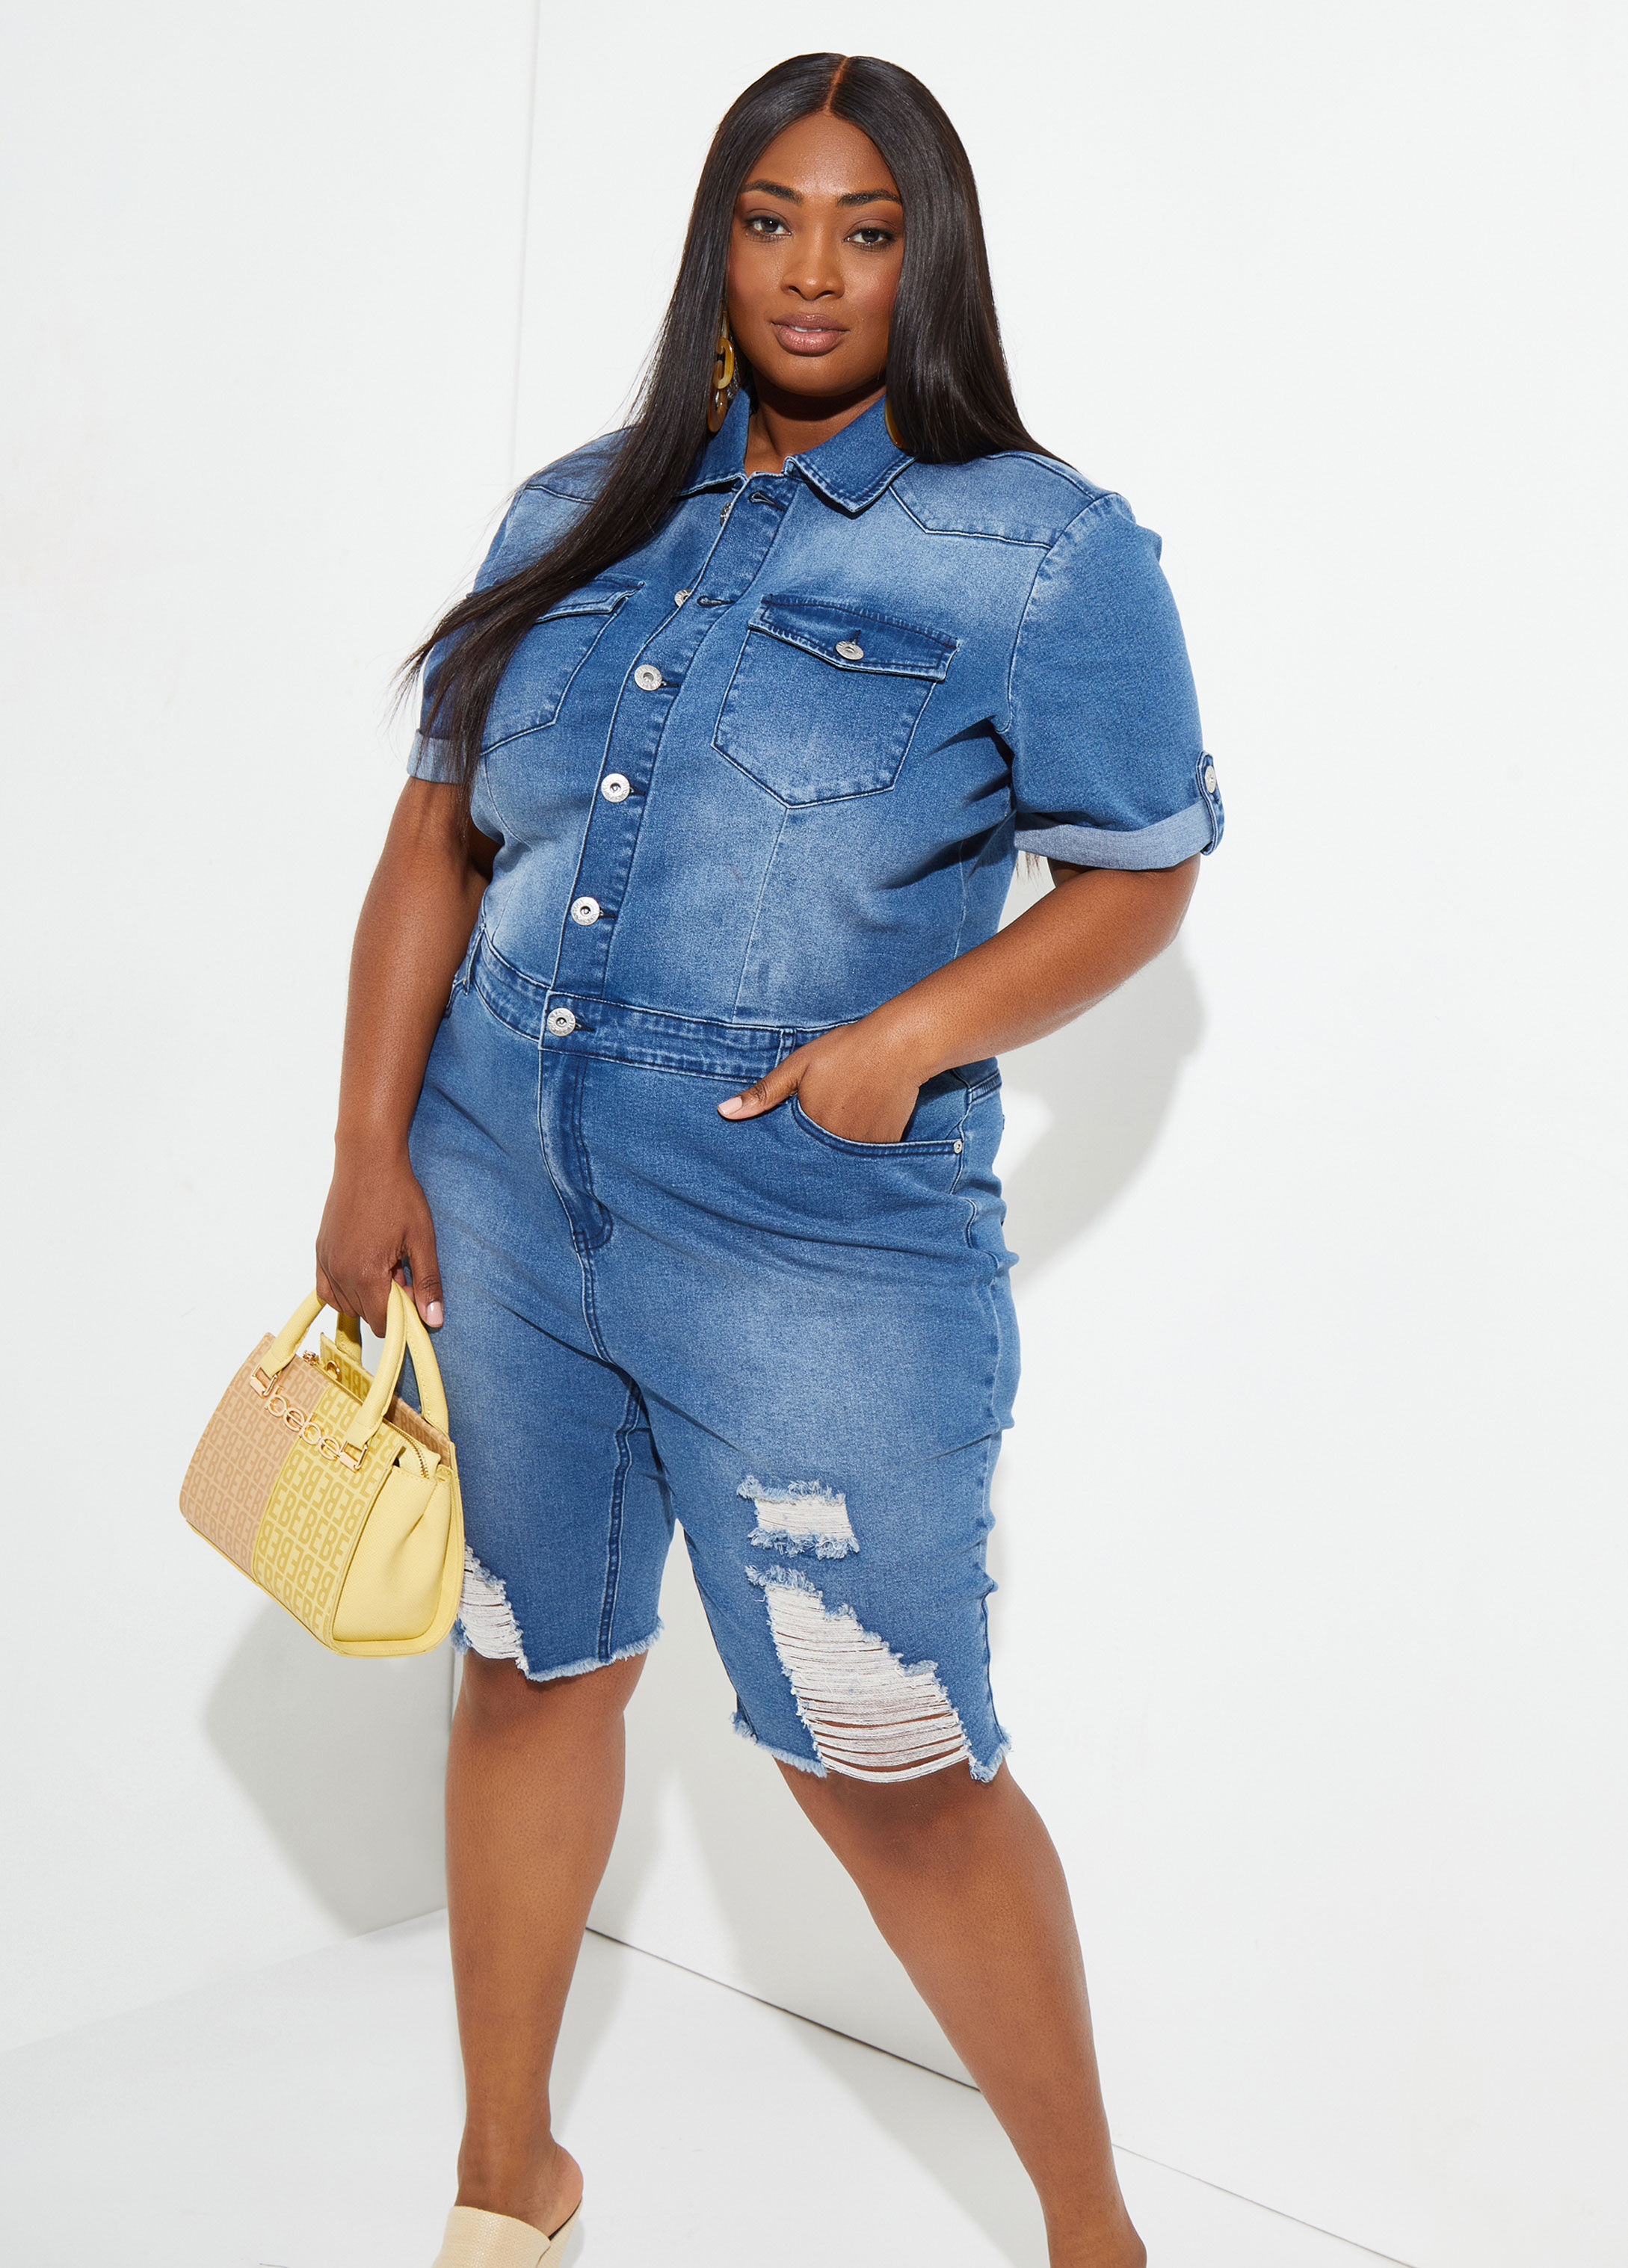 A Denim Jumpsuit with a French Twist - Jeans and a Teacup